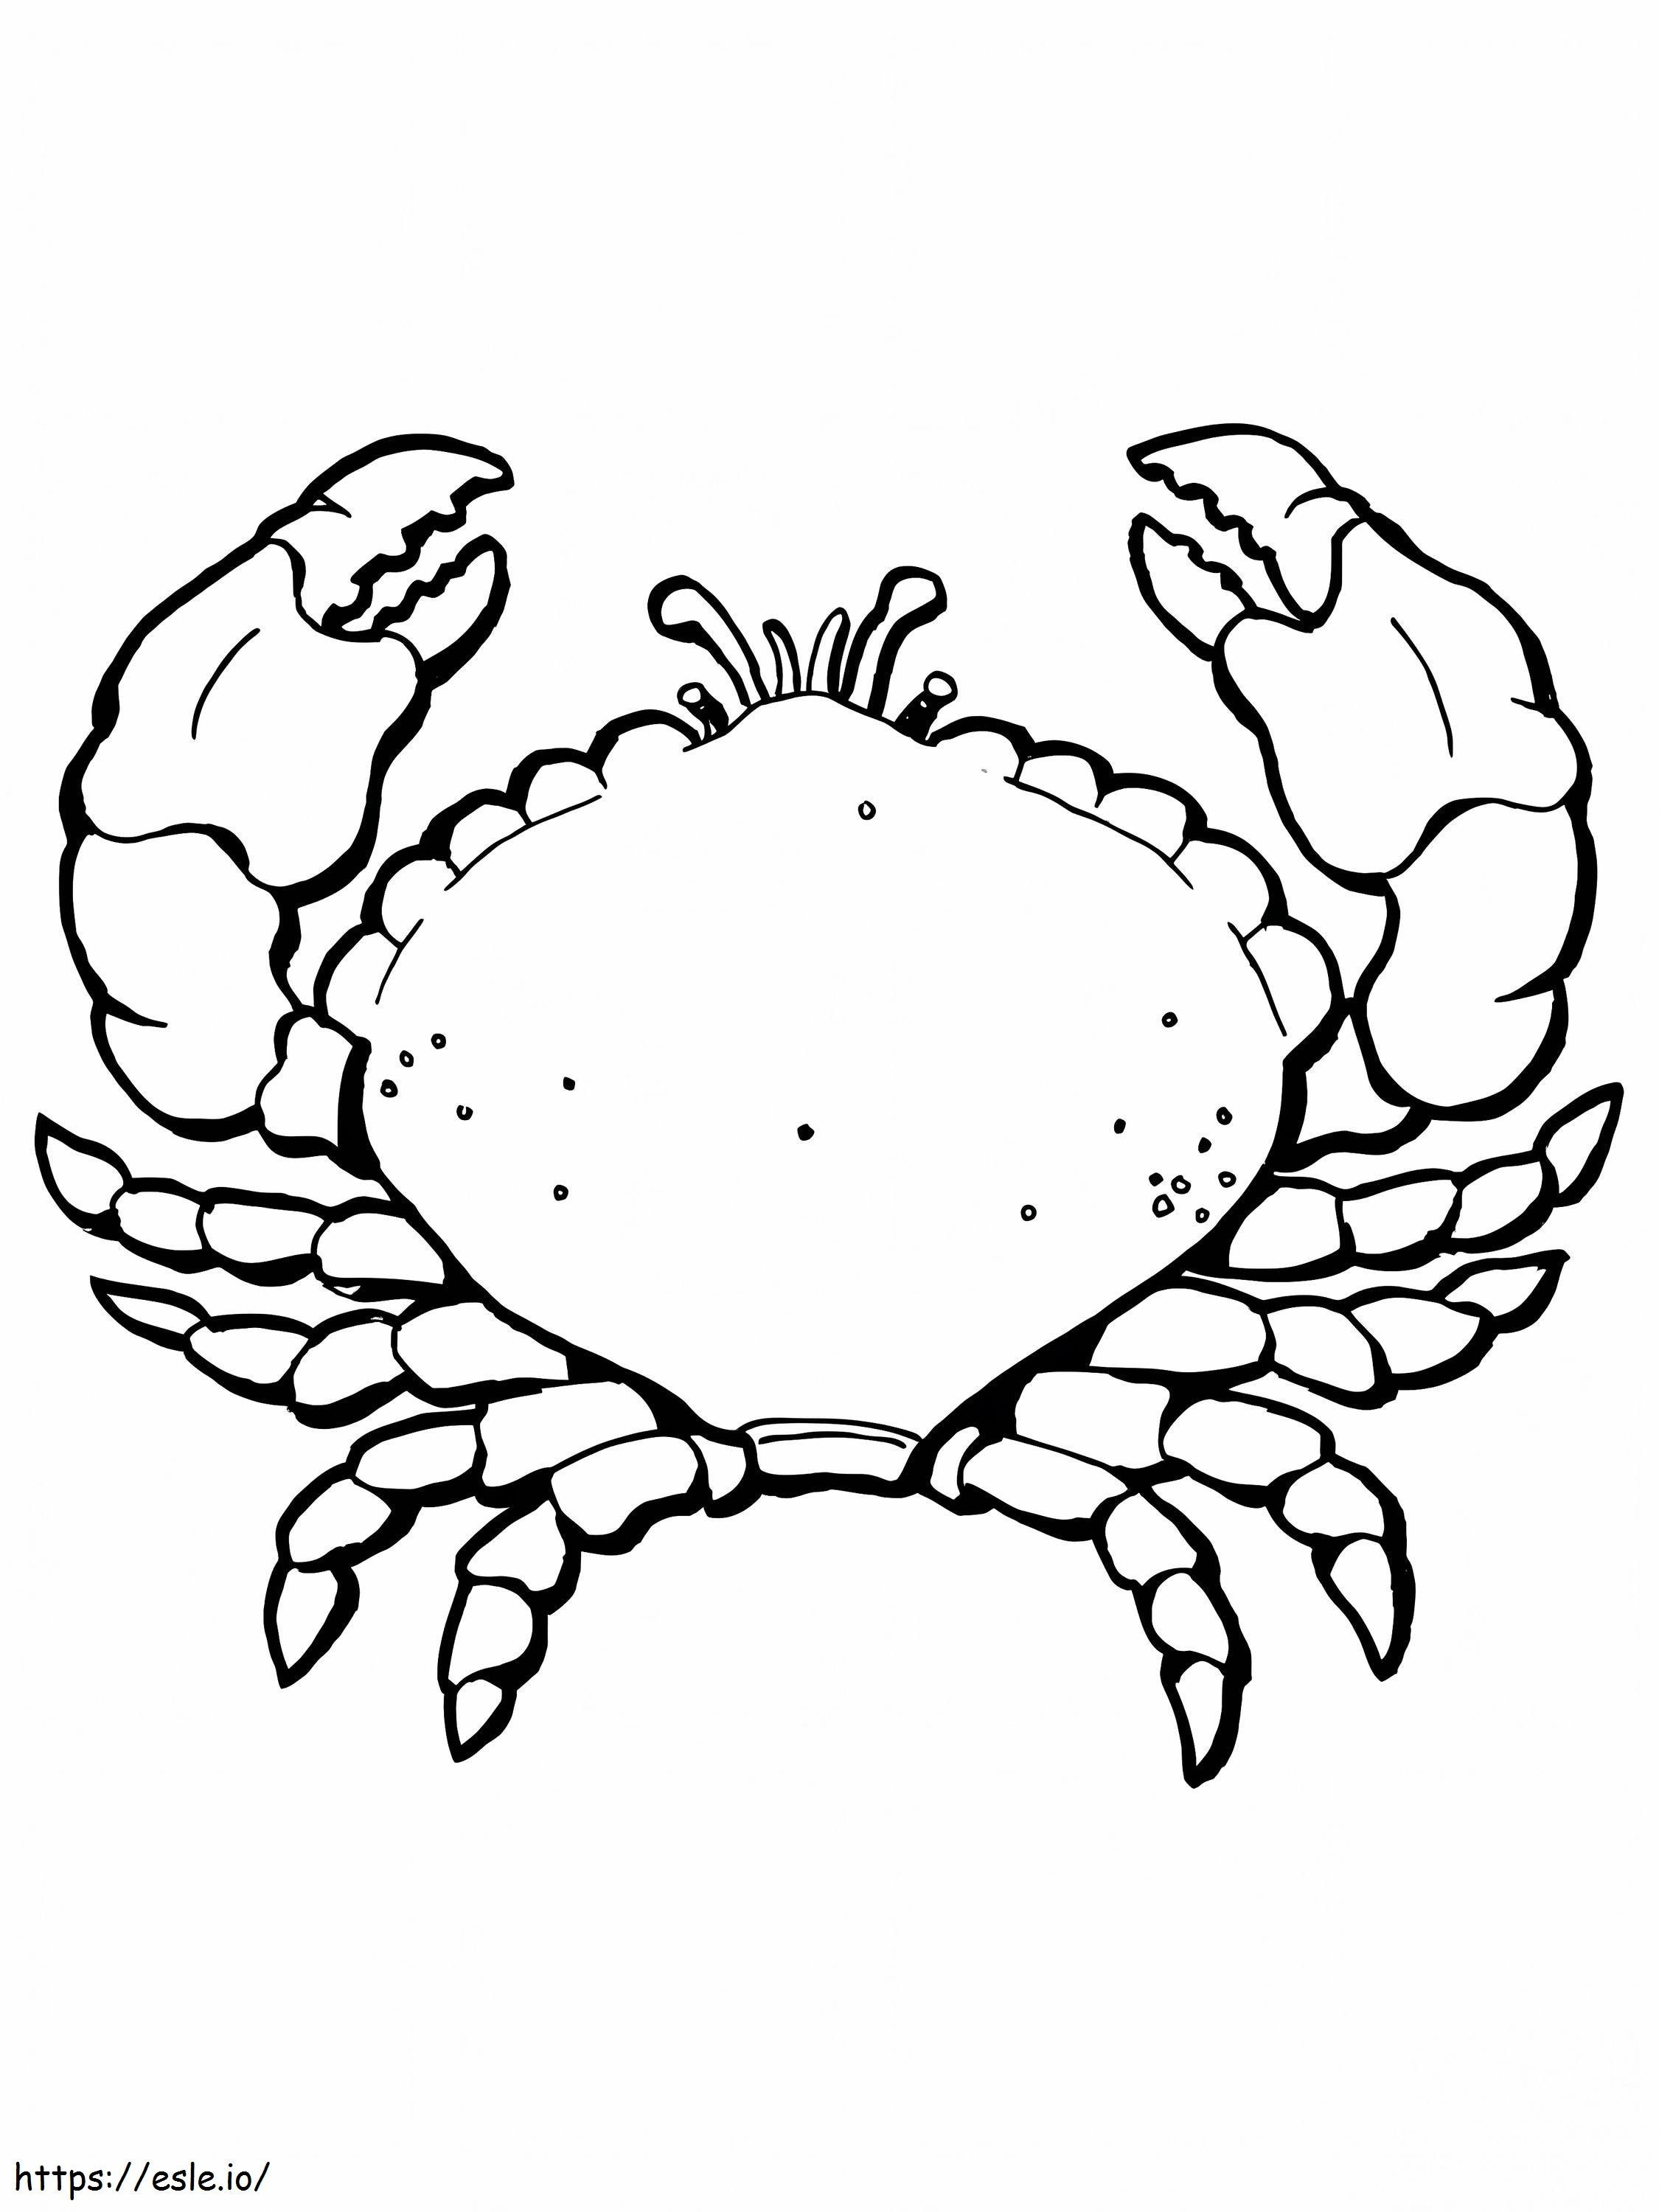 Basic Crab coloring page